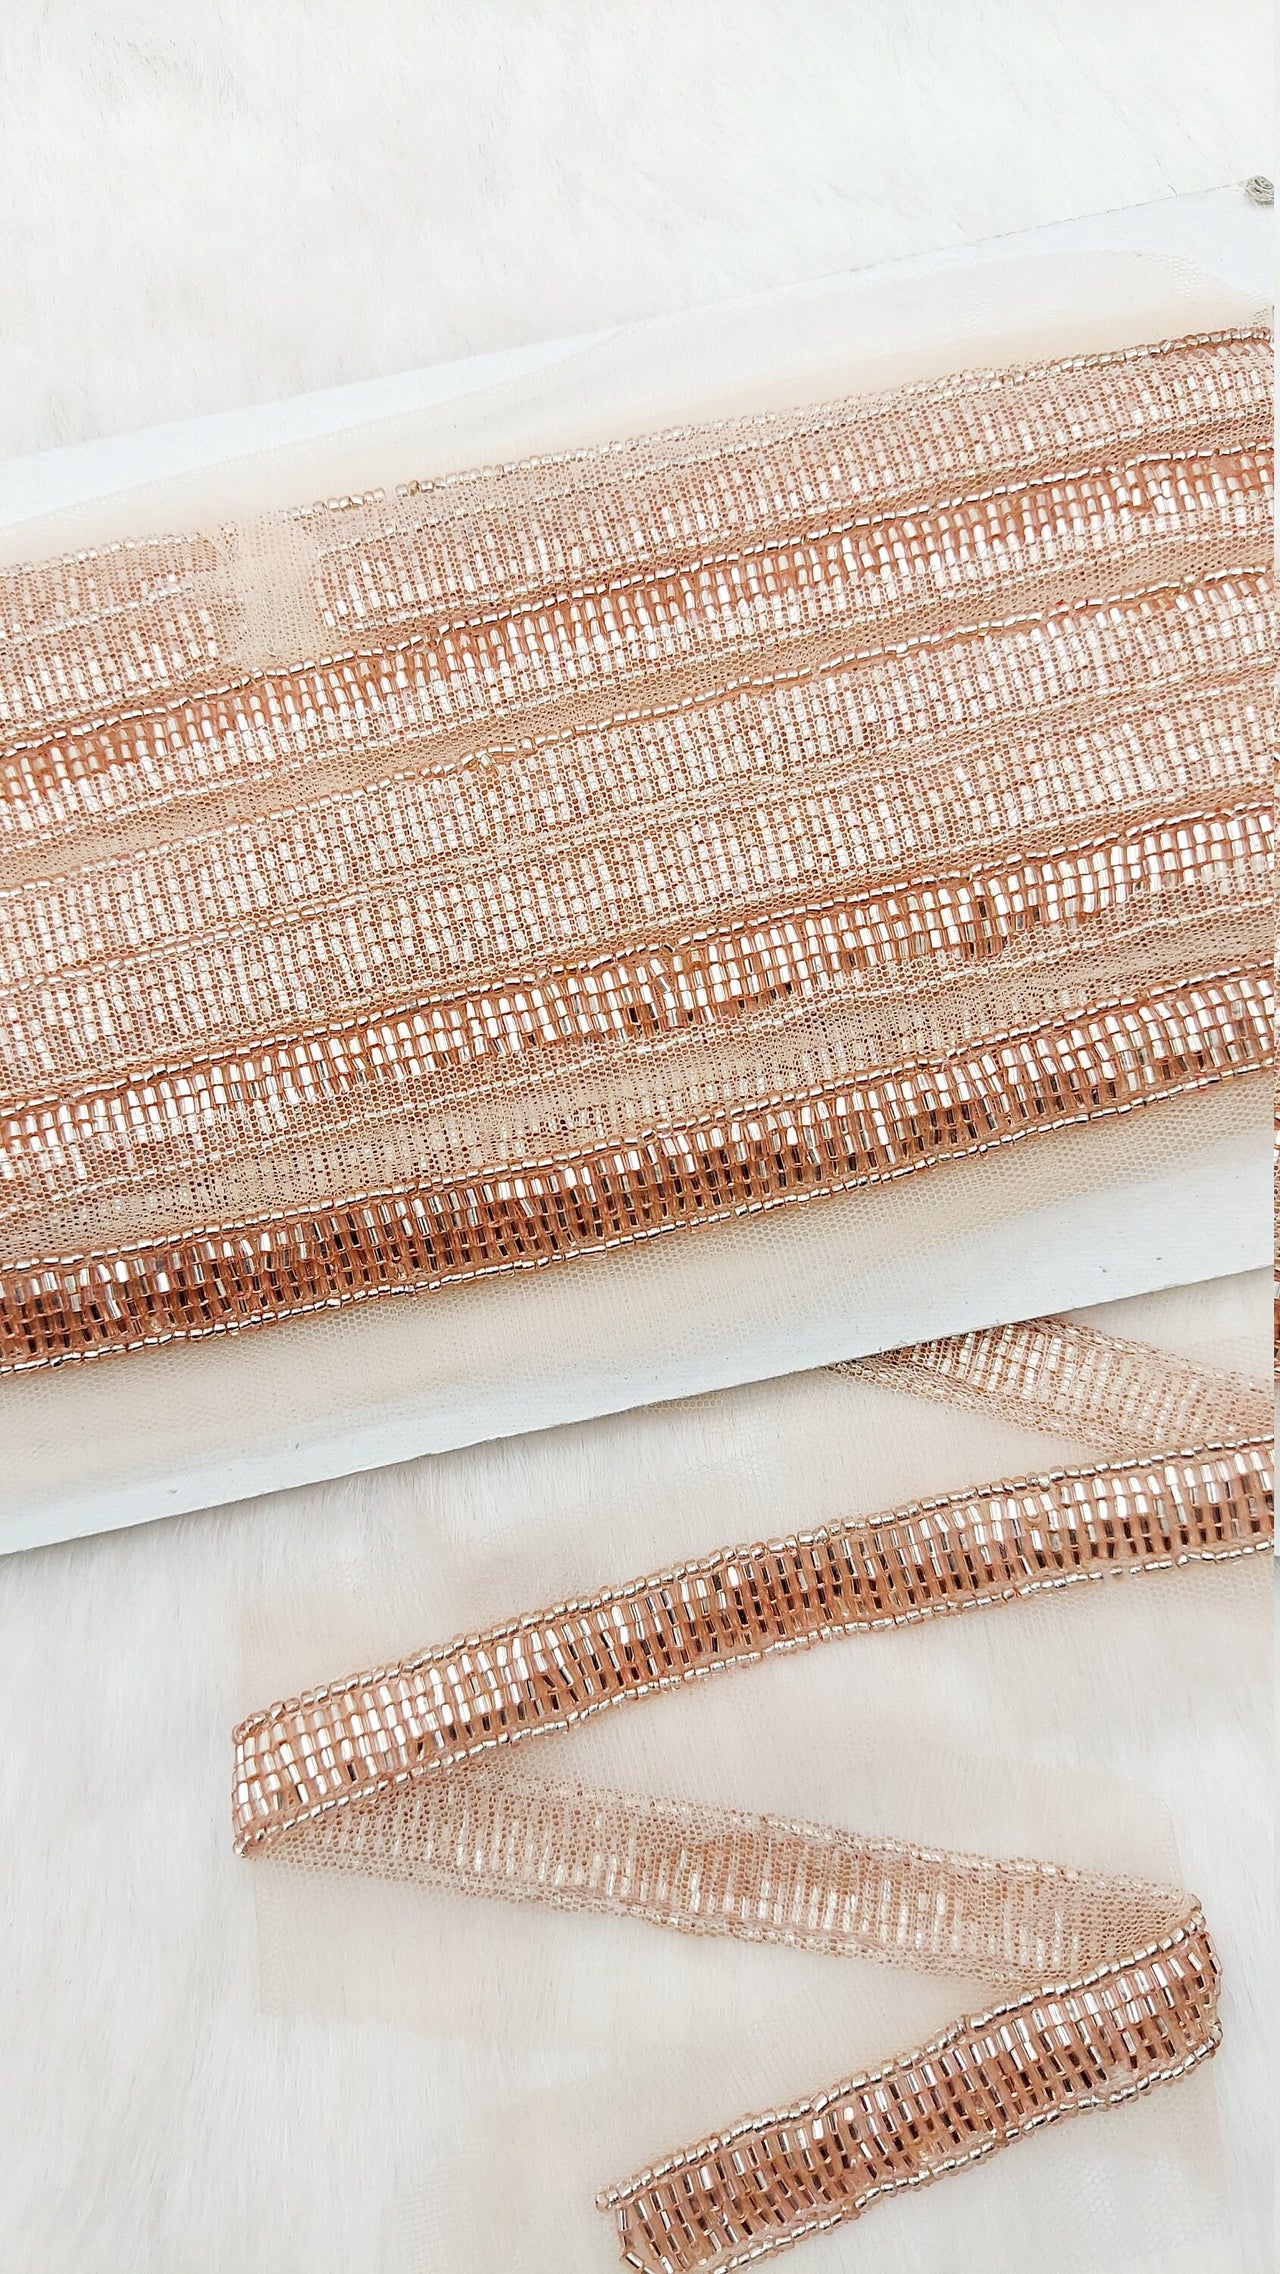 Beige Net Bridal Trim Rose Gold Beaded Embroidery, Hand Embroidered Bead Lace, Trim By 9 Yards